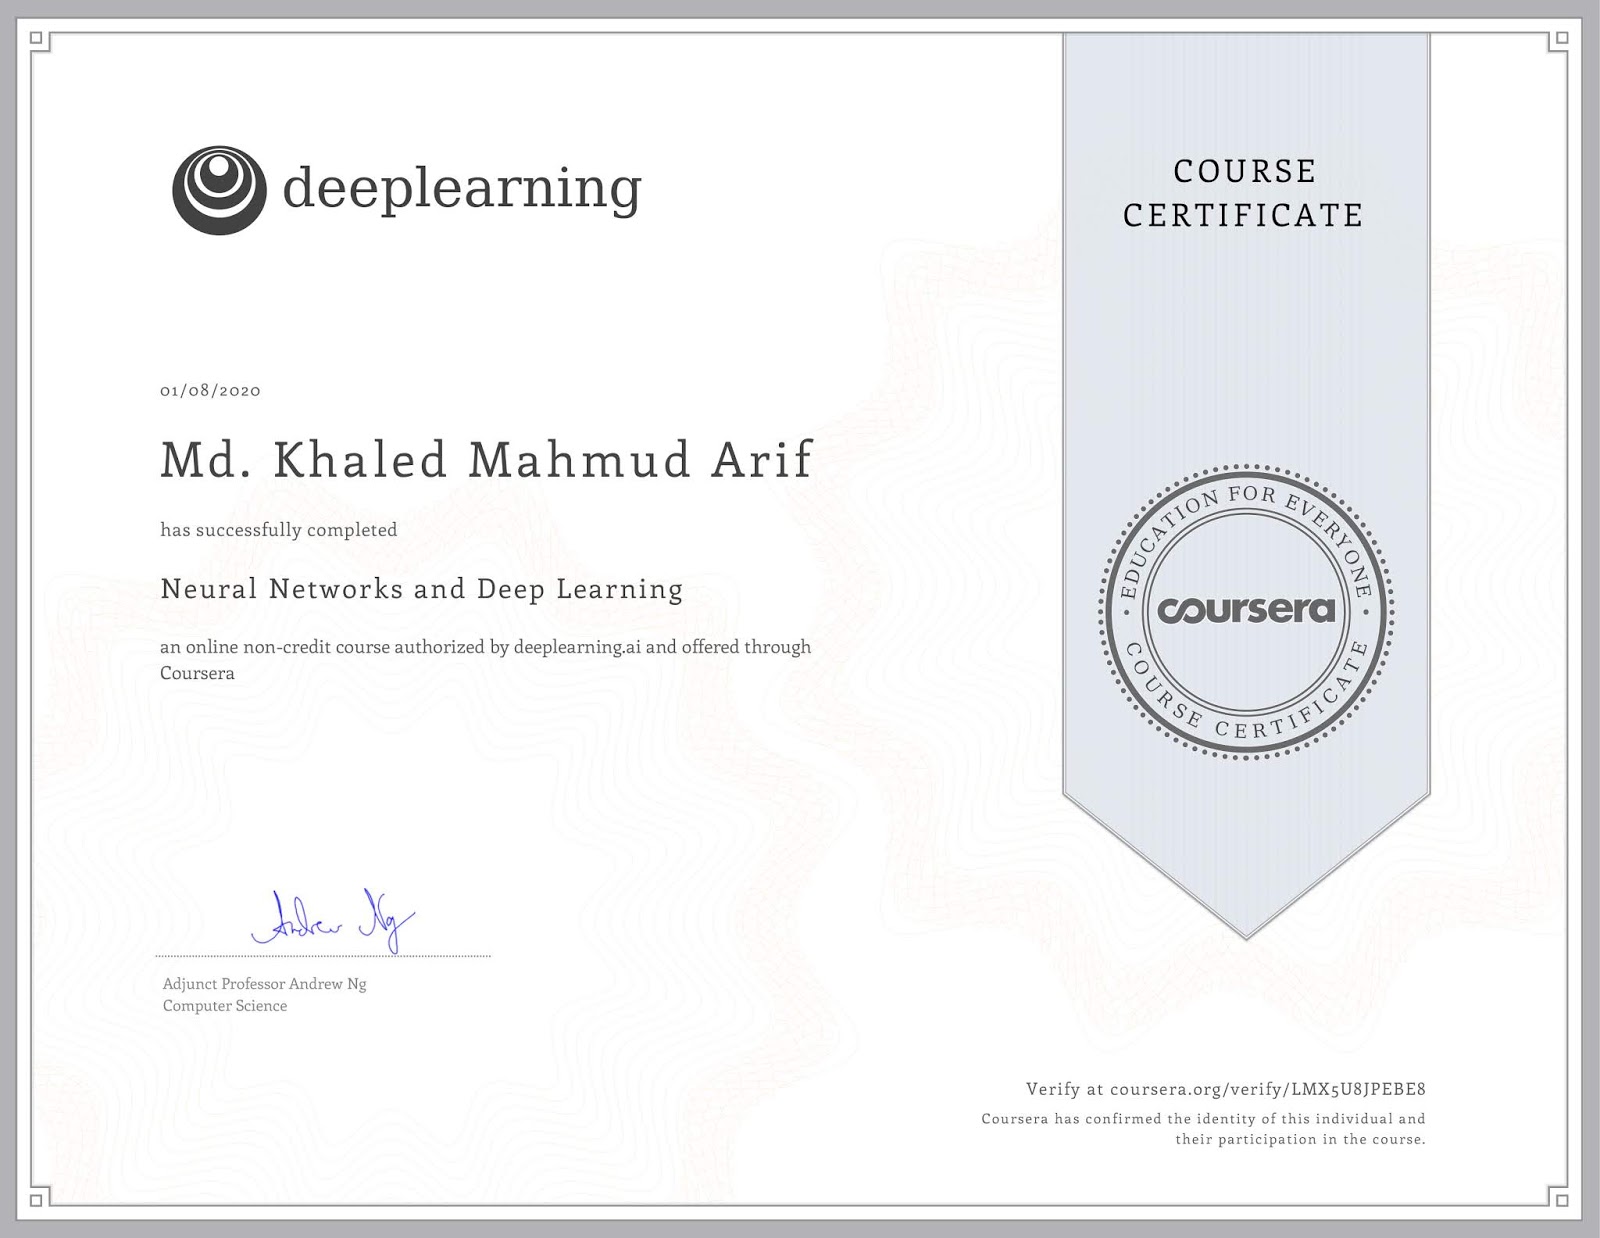 Deep Learning and Neural Network Certification Coursera